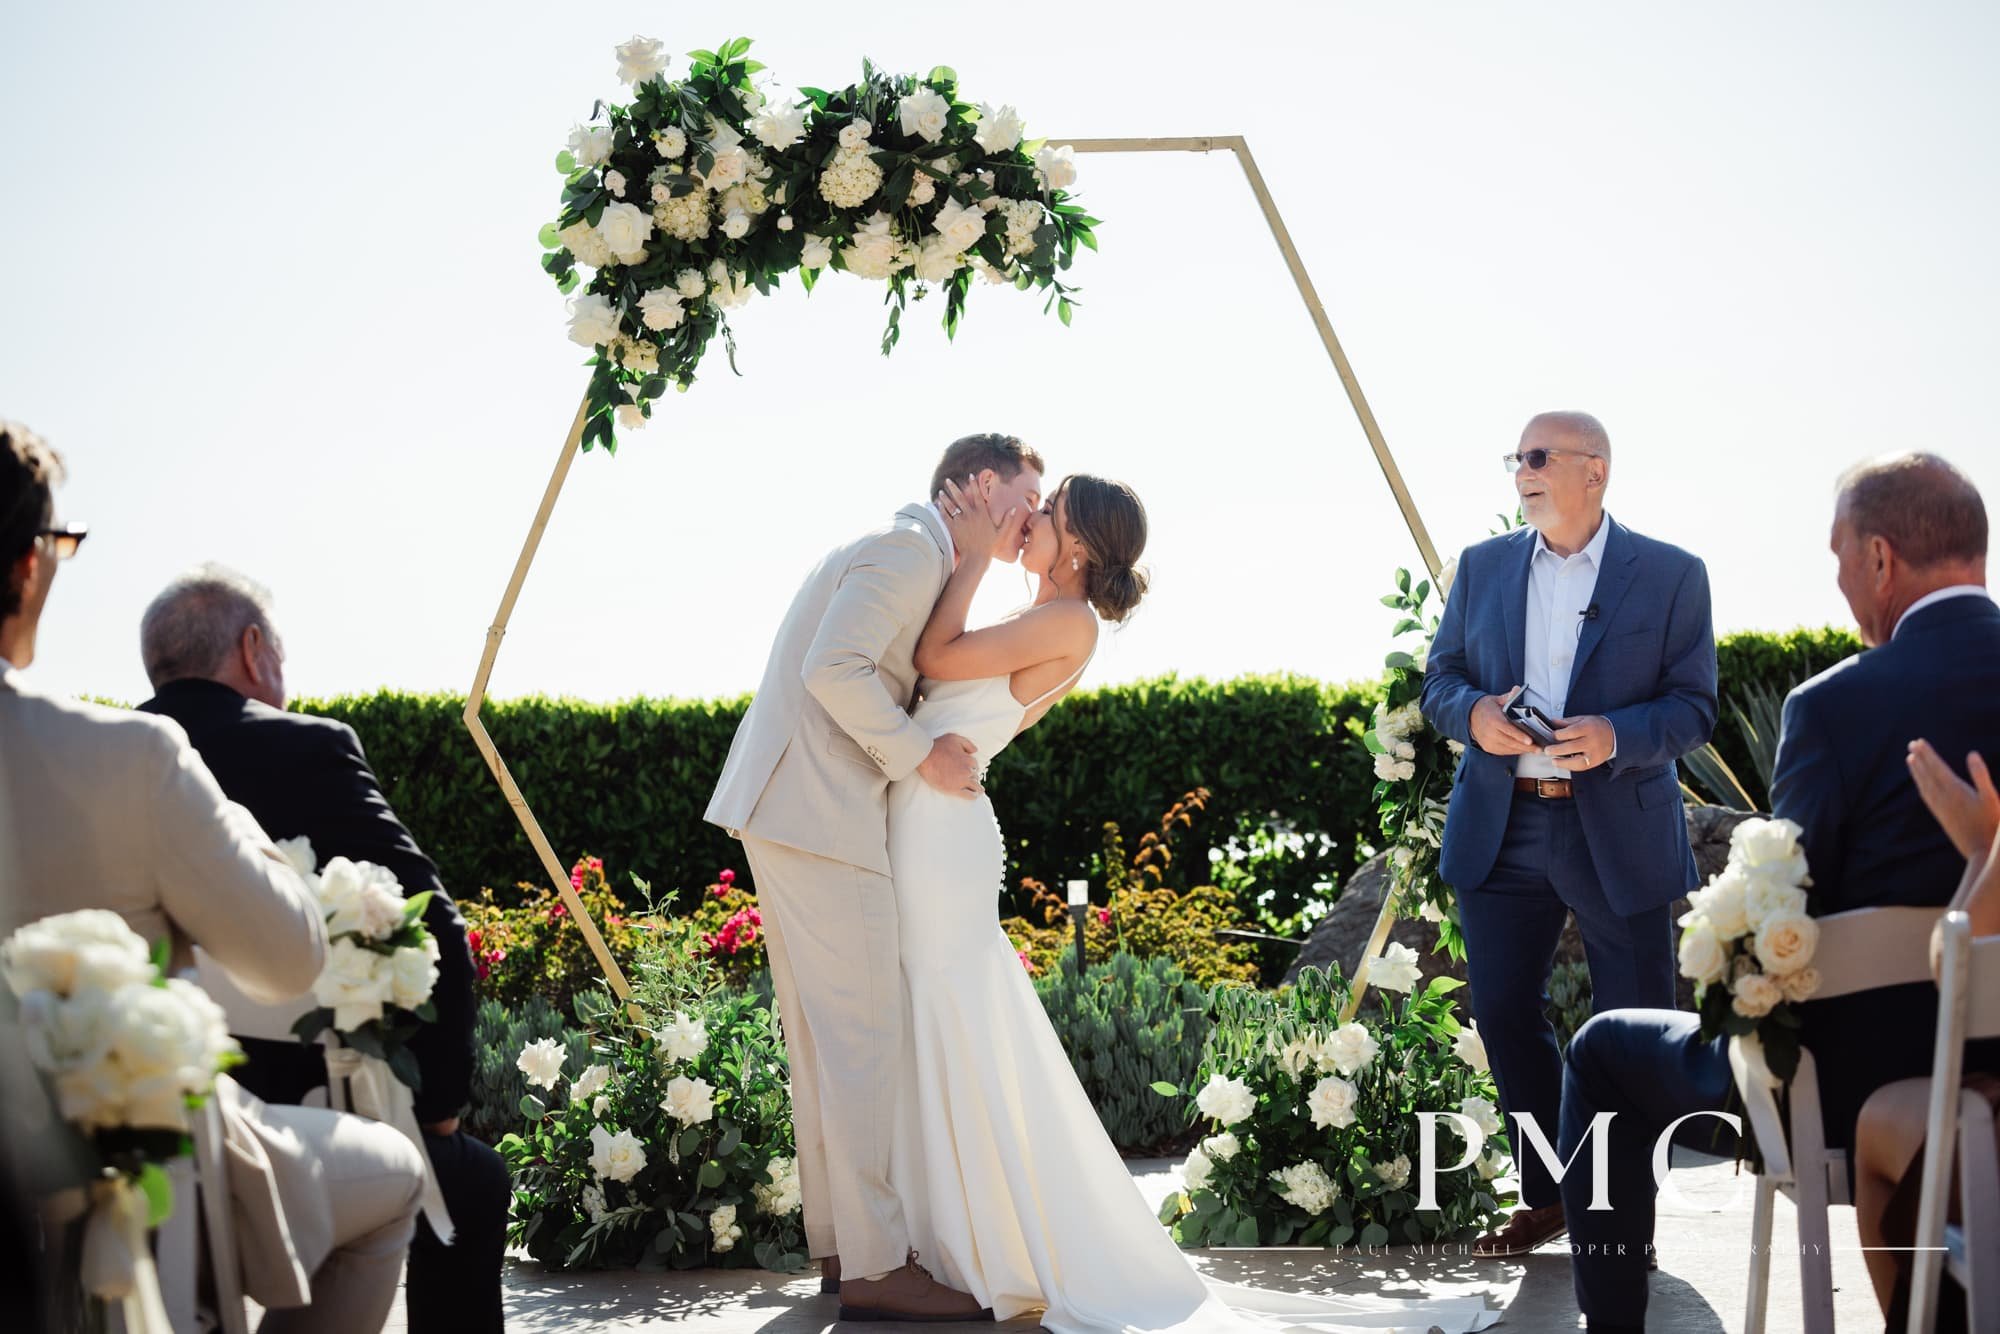 A bride and groom share a passionate first kiss at their sunny wedding ceremony at the Hyatt Regency Mission Bay Resort.